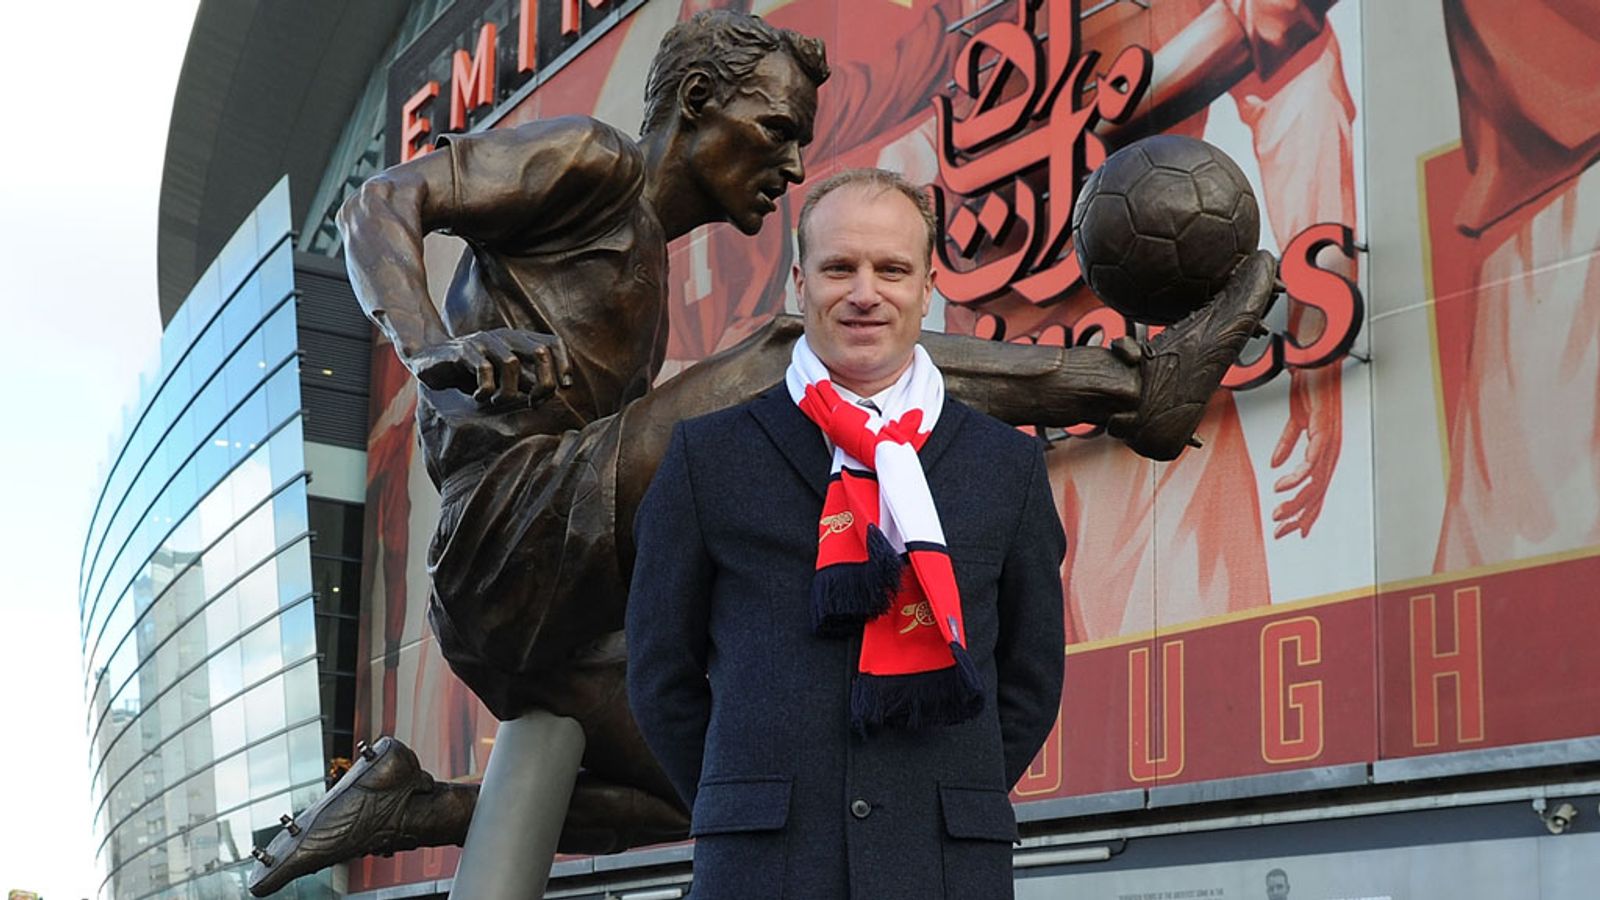  Dennis Bergkamp stands next to his statue outside Emirates Stadium.